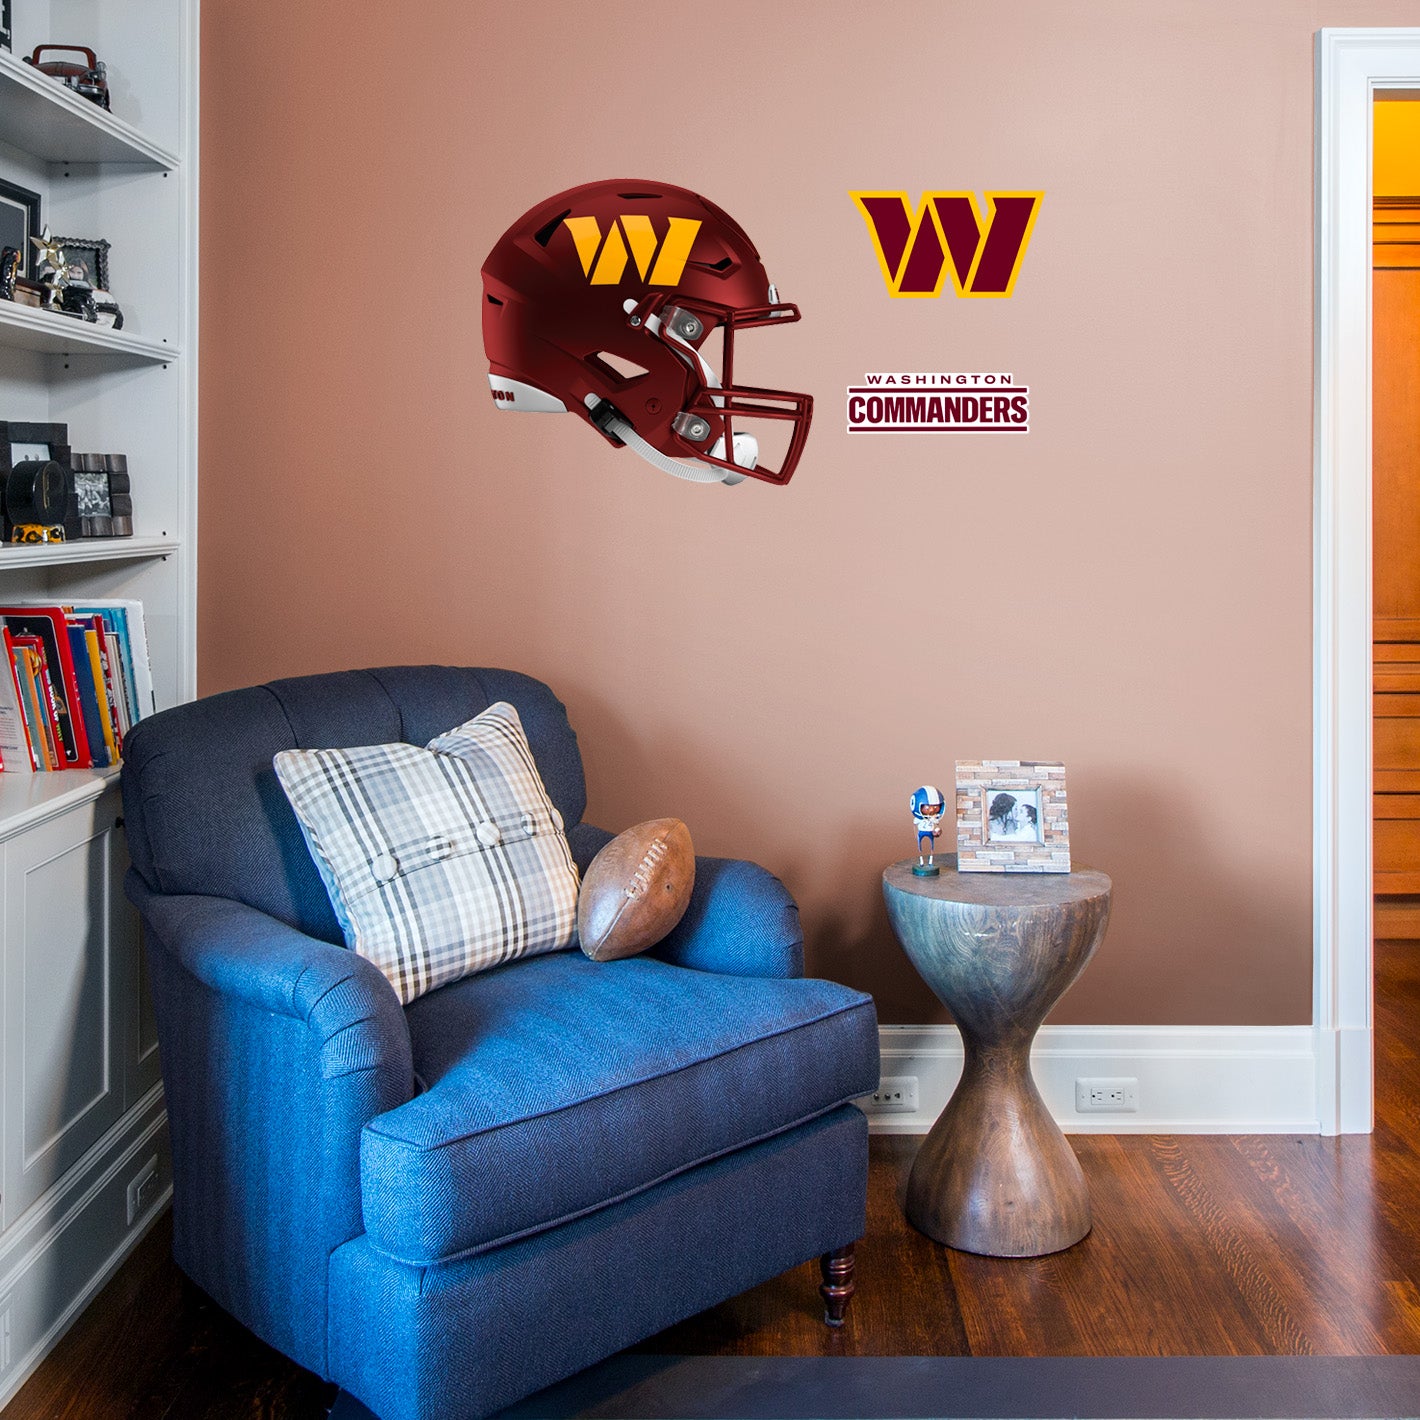 Washington Commanders: Helmet - Officially Licensed NFL Removable Adhesive Decal